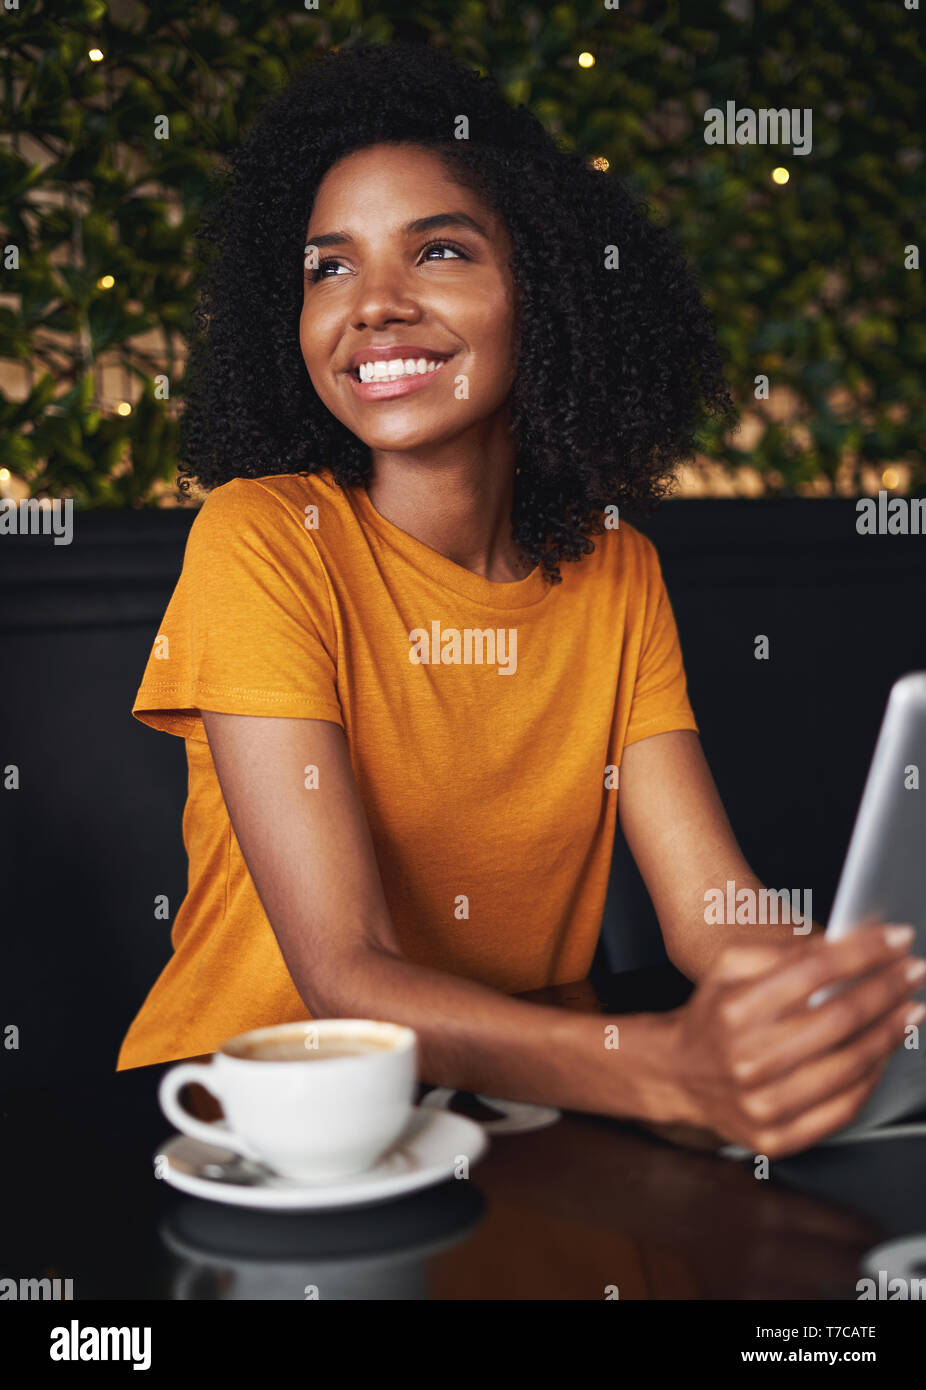 Smiling young woman in cafe looking away Banque D'Images